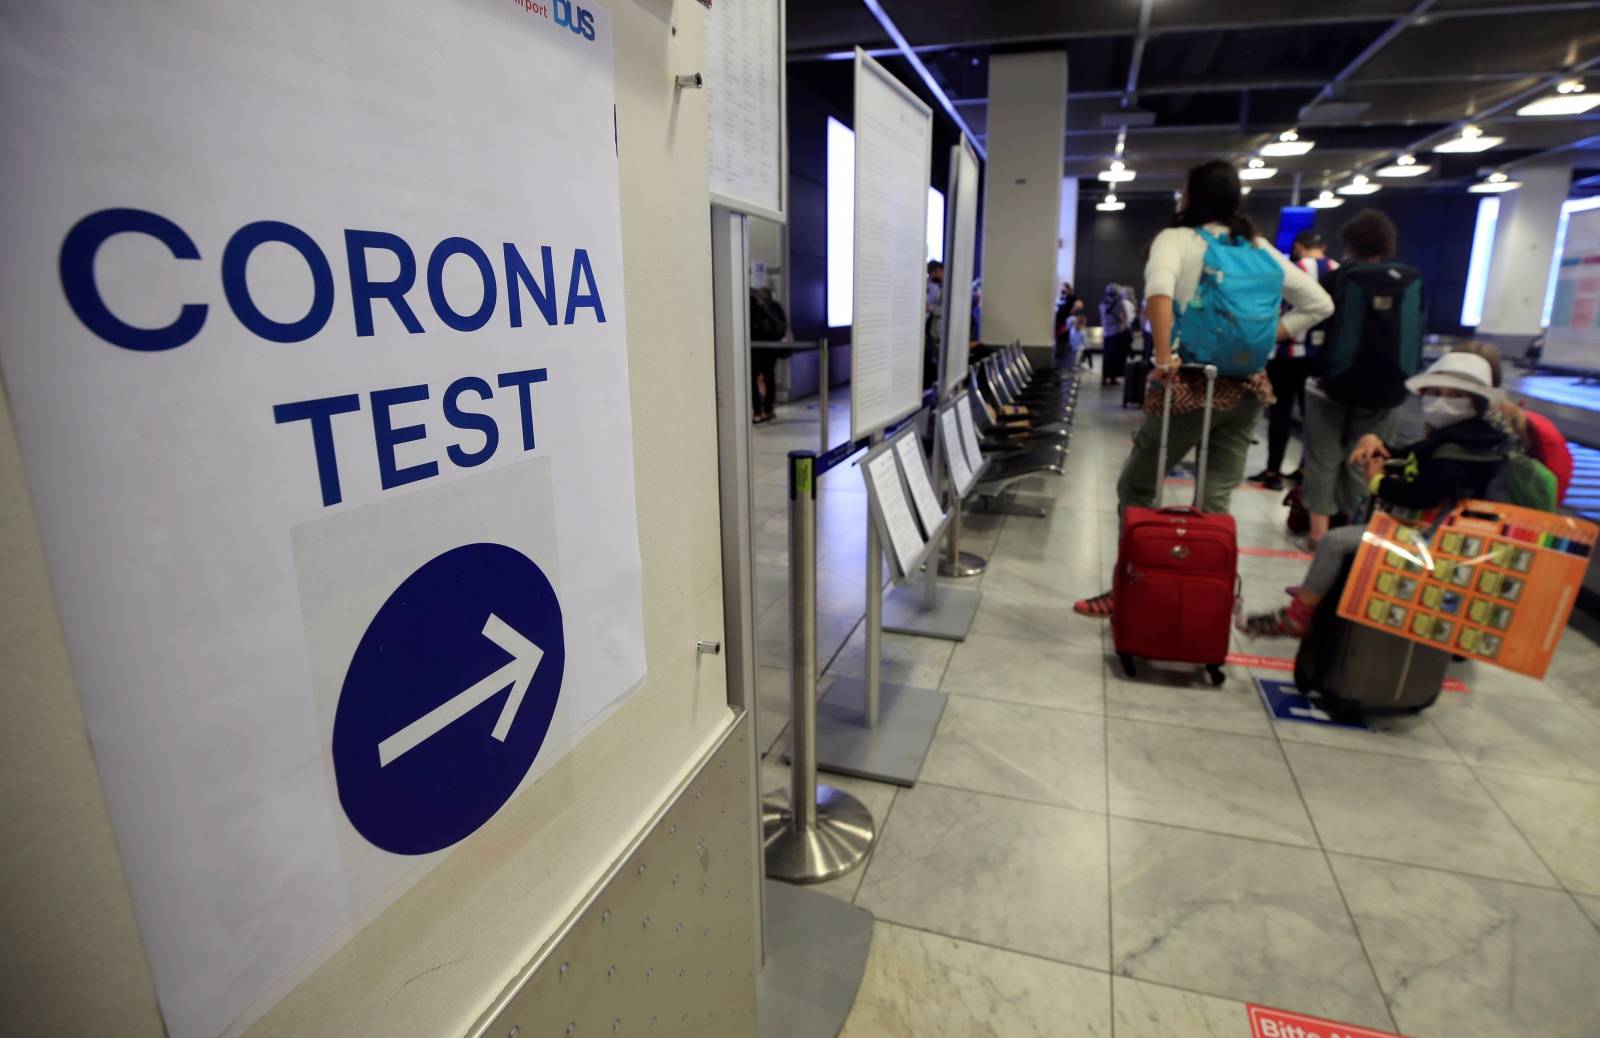 Corona test centre at Duesseldorf Airport